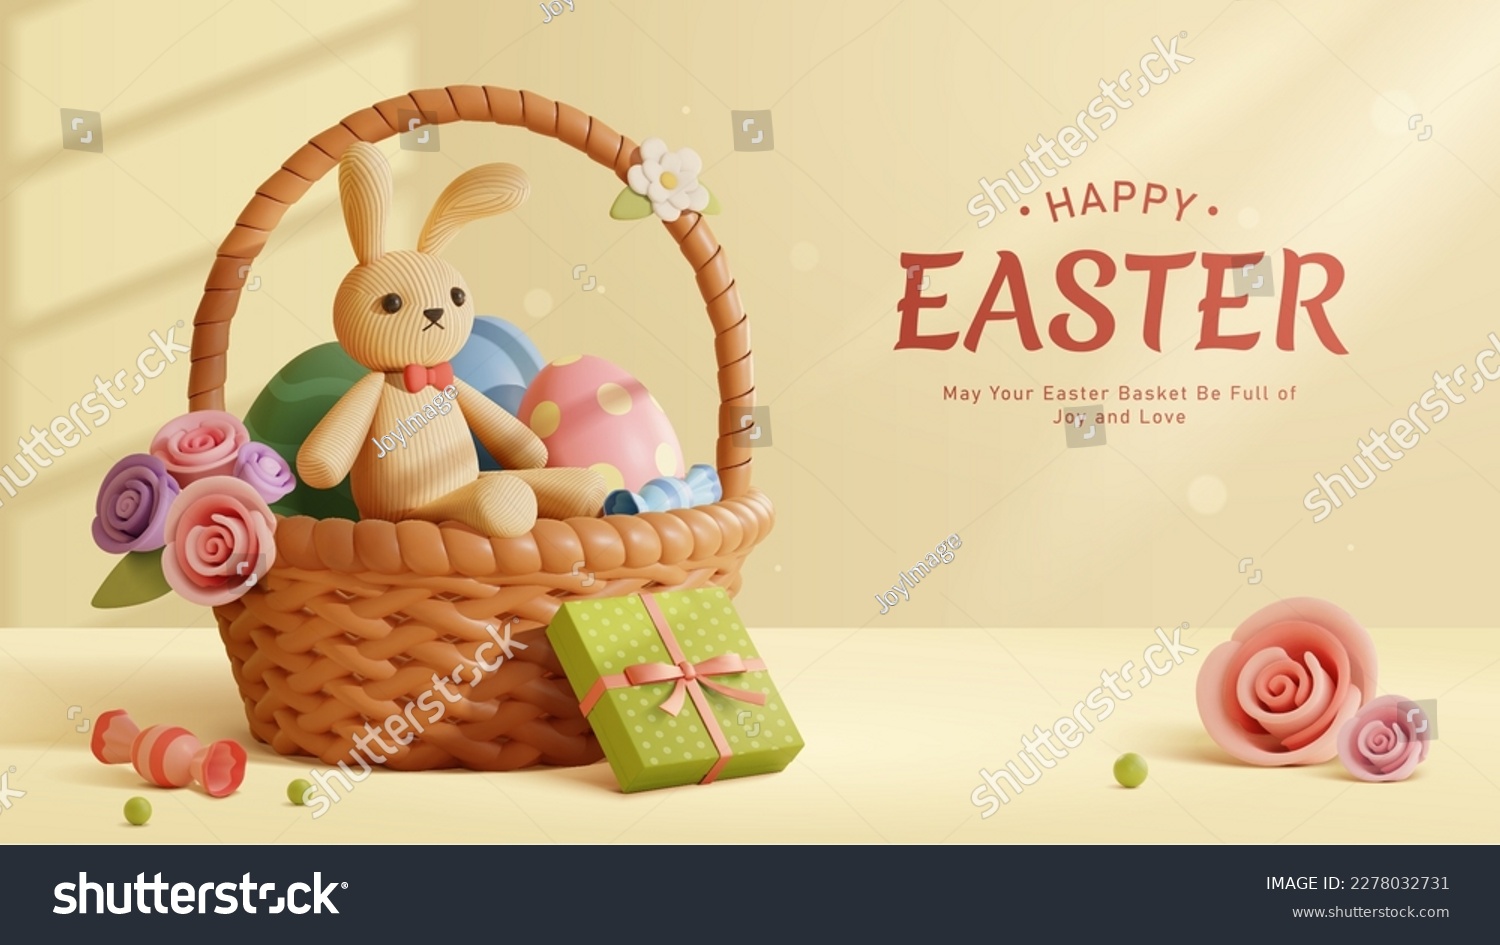 3D Easter poster. Corduroy rabbit plushy in basket full of painted eggs, candy, and roses on light beige background. #2278032731